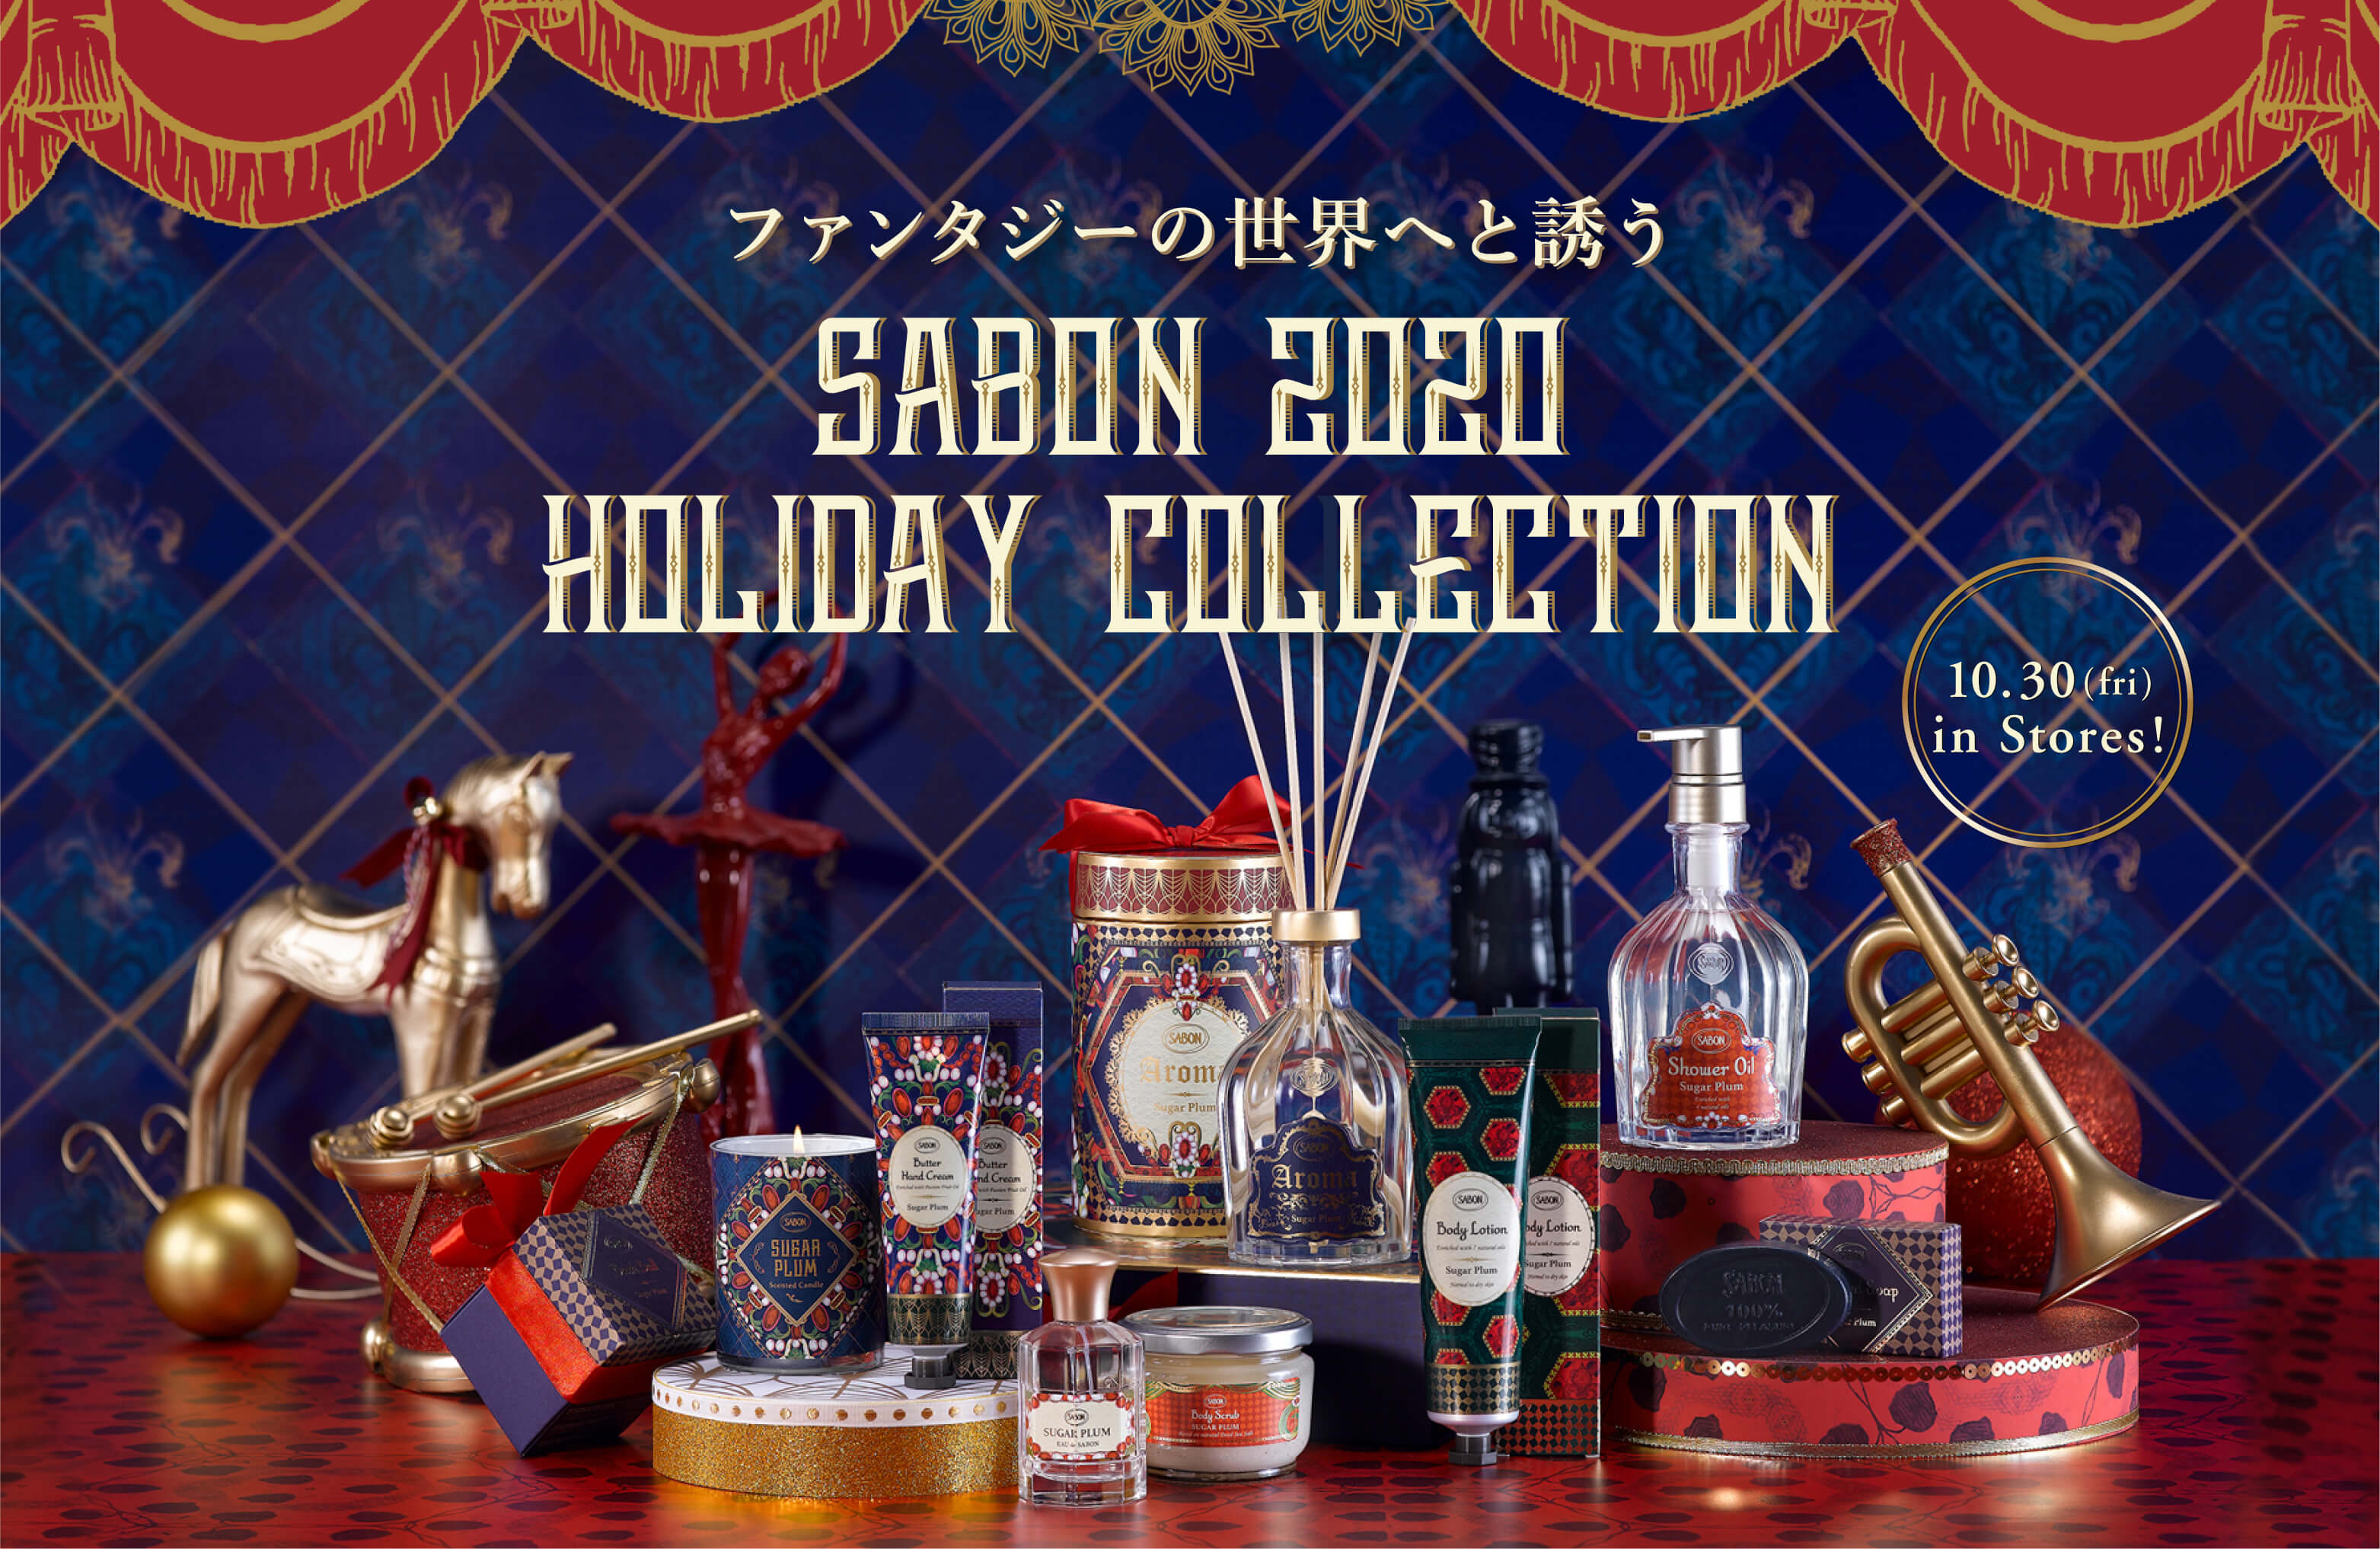 SABON 2020 HOLIDAY COLLECTION　10.30(fri) in stores!